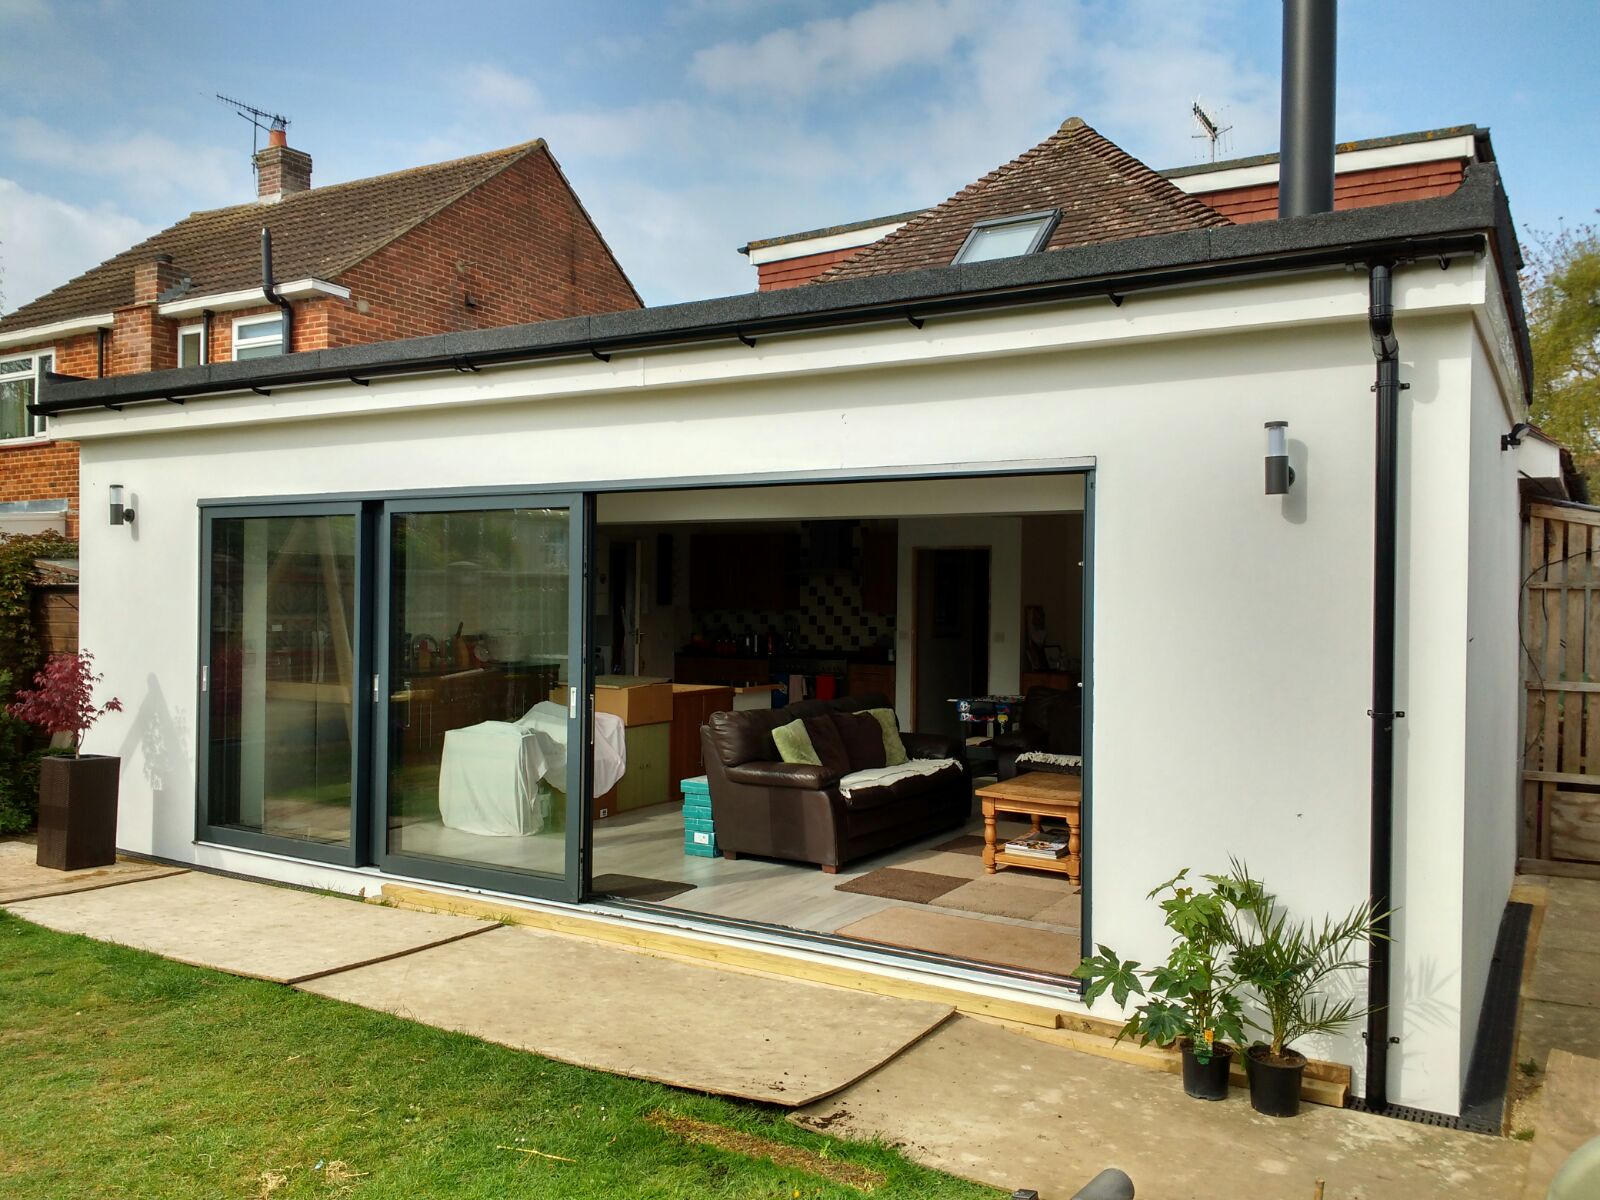 Gallery - Architectural Services in Leeds | West Yorkshire